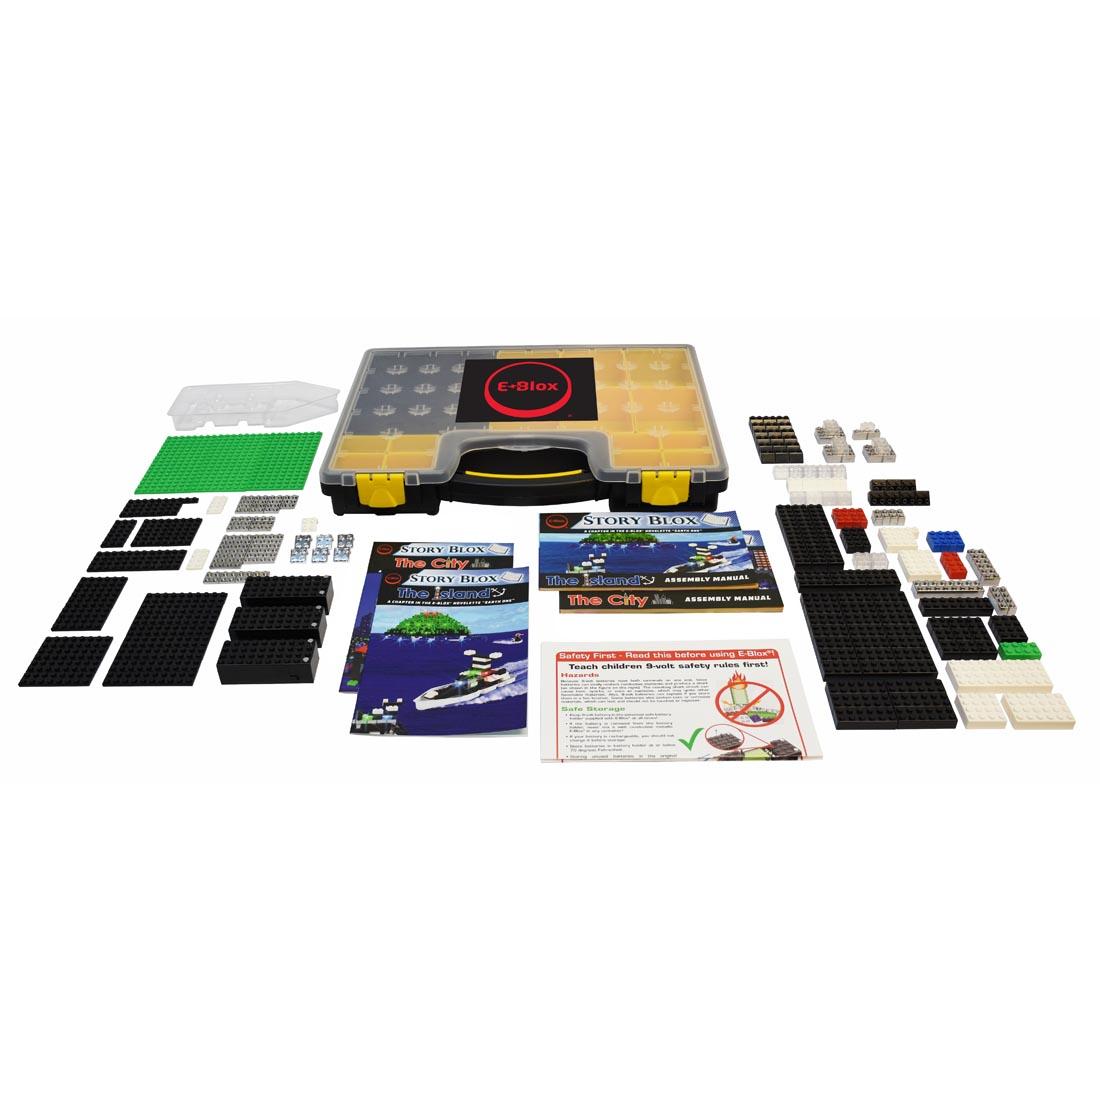 Contents of the E-Blox Story Blox 2-In-1 Classroom Set